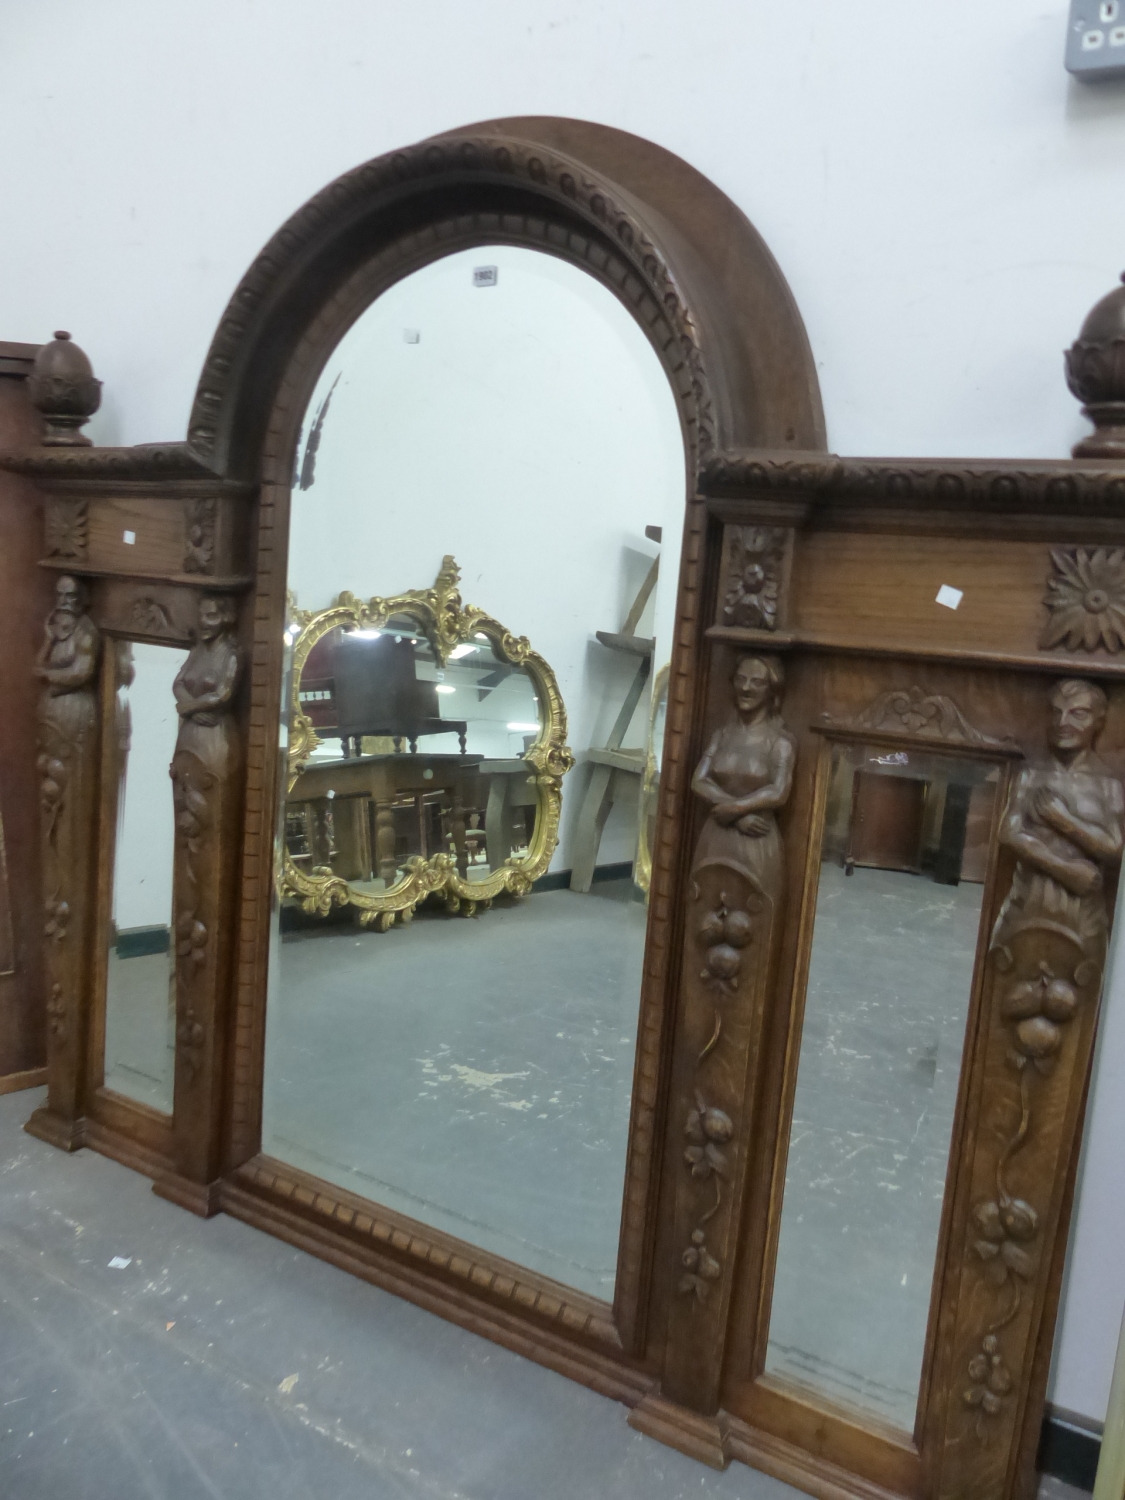 A VICTORIAN TRIPLE PLATE BEVELLED GLASS MIRROR, THE CENTRAL ROUND ARCH OF THE OAK FRAME FLANKED BY